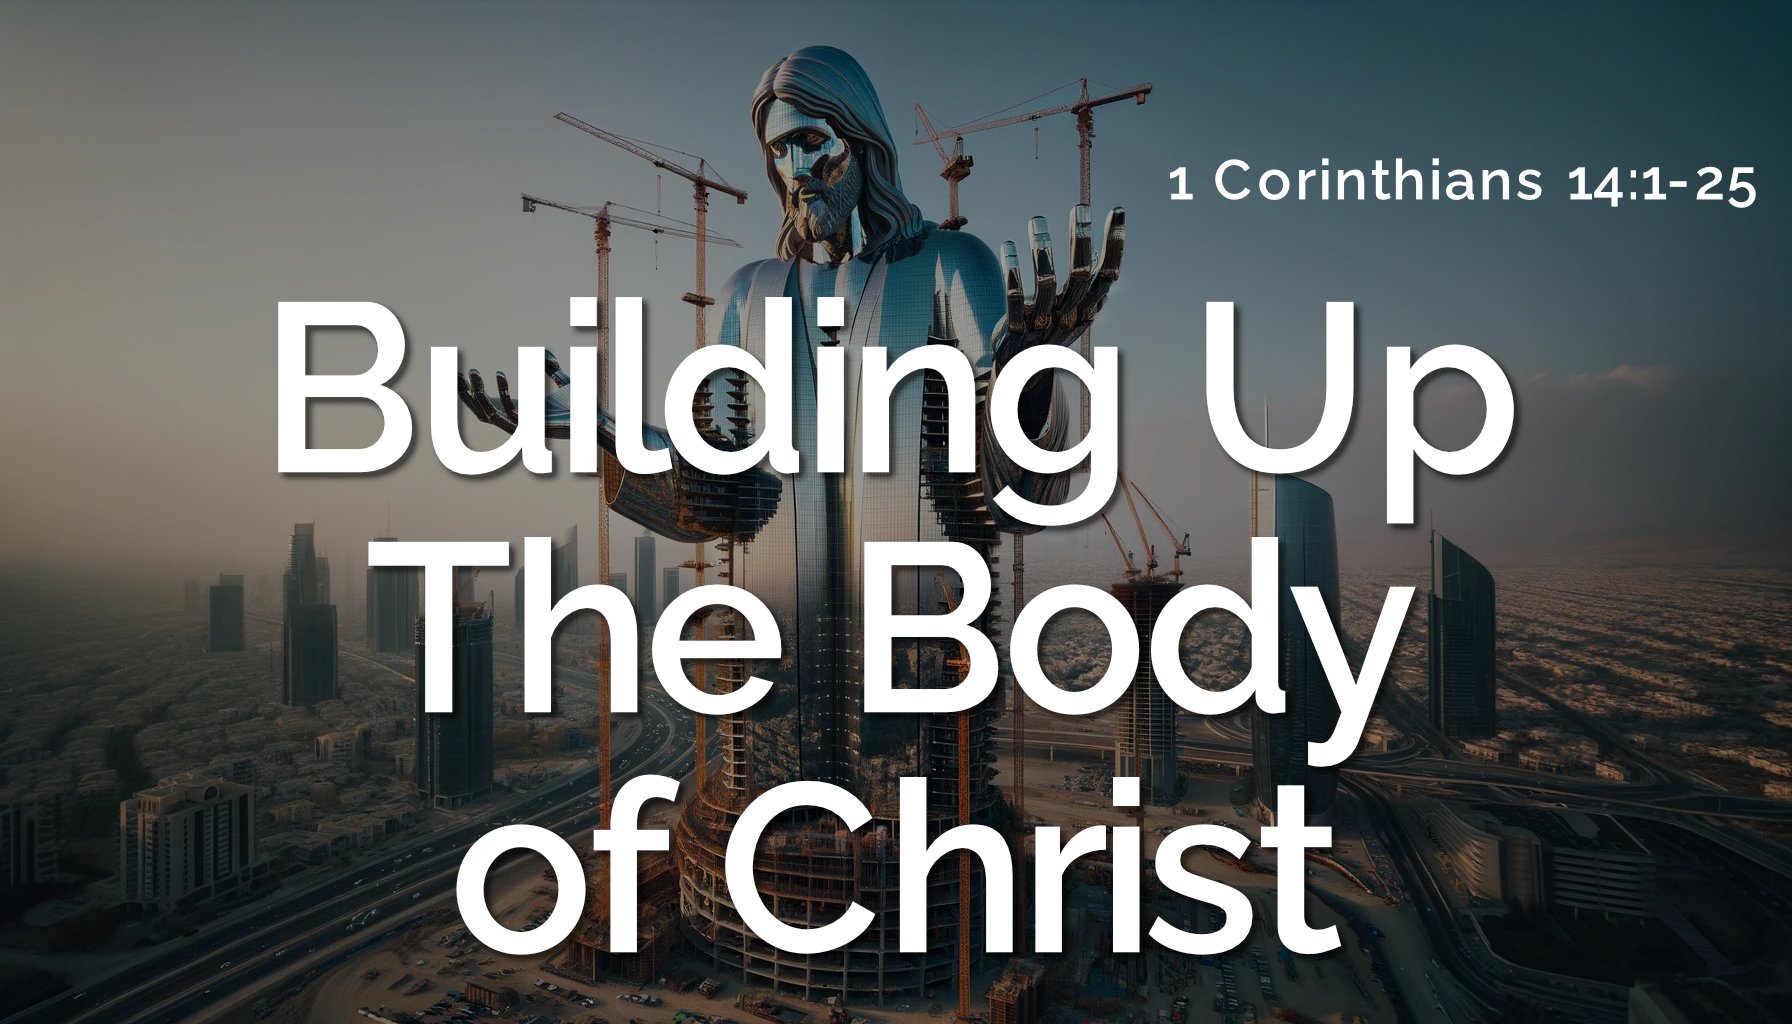 23.12.30a - 1 Corinthians 14.1-25 - Building Up The Body of Christ.jpg